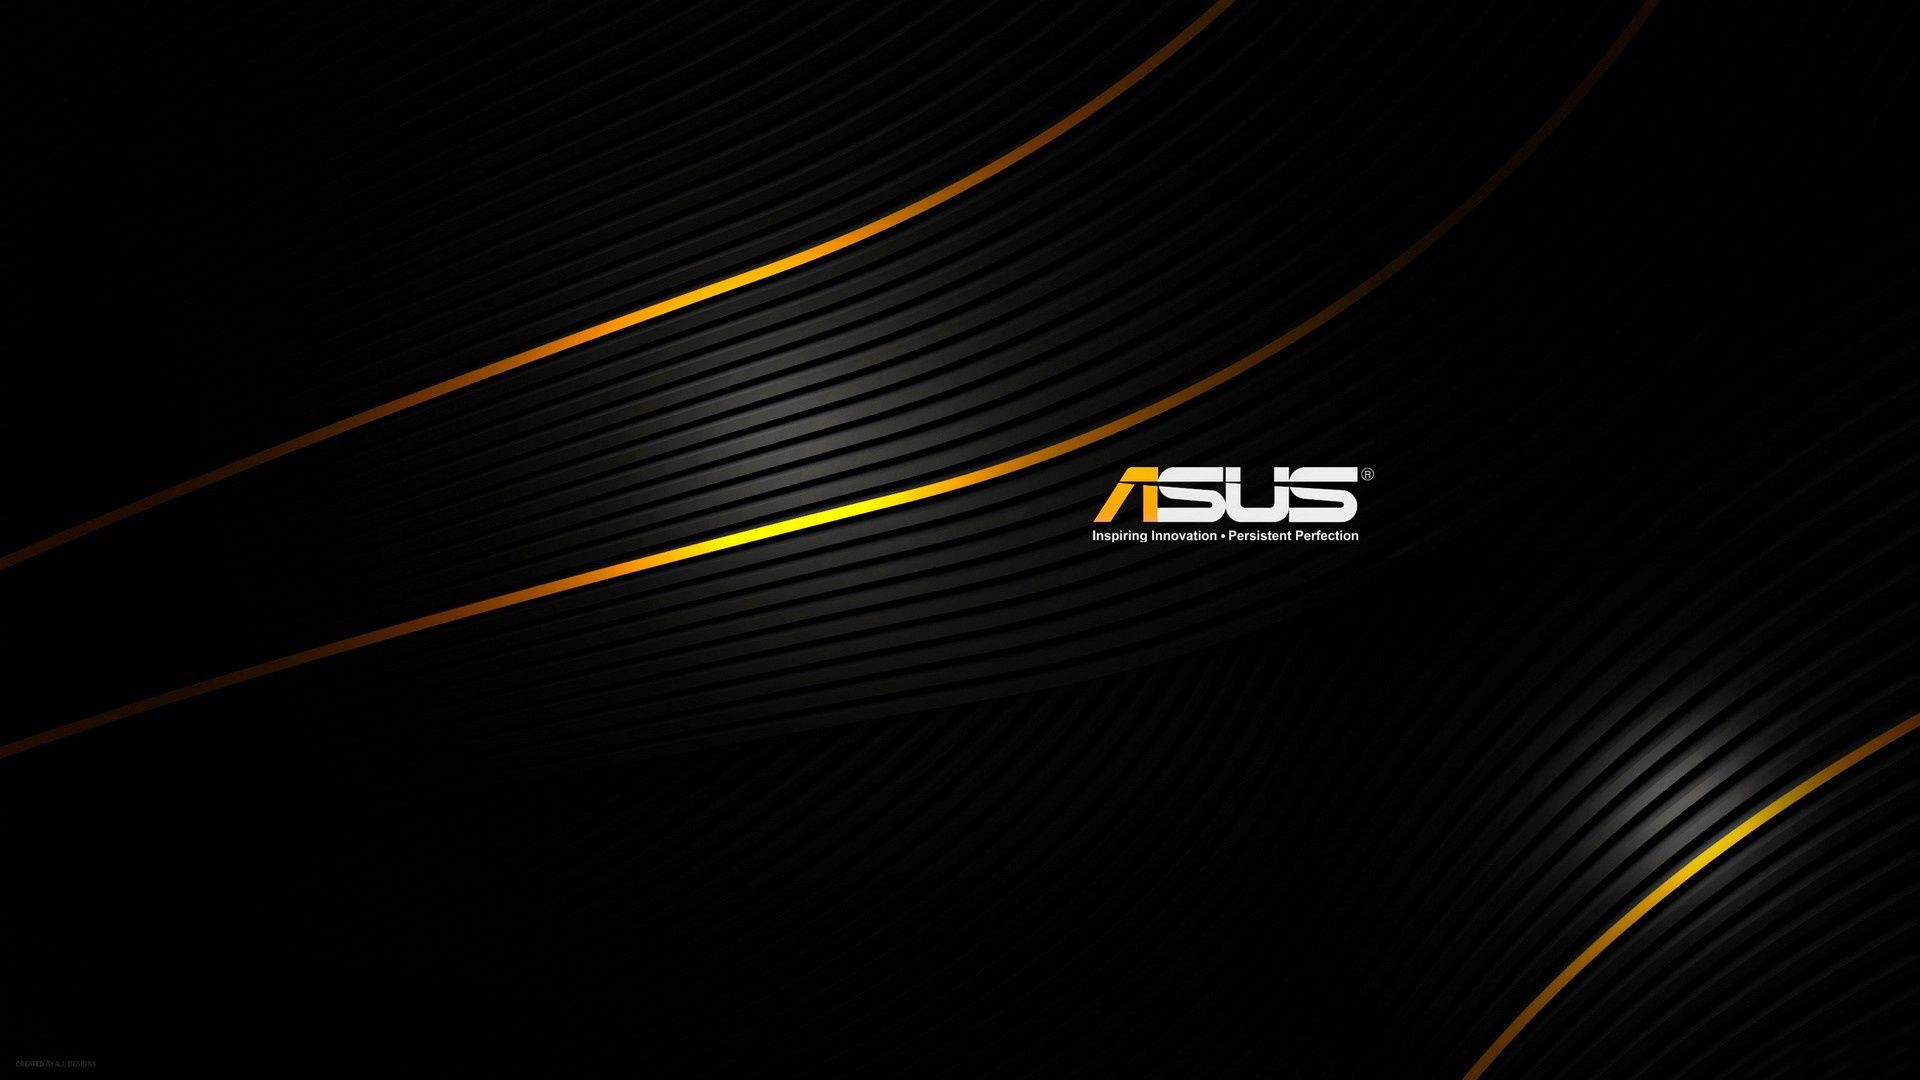 Asus Black Background Wallpapers - 1920x1080 - 250550